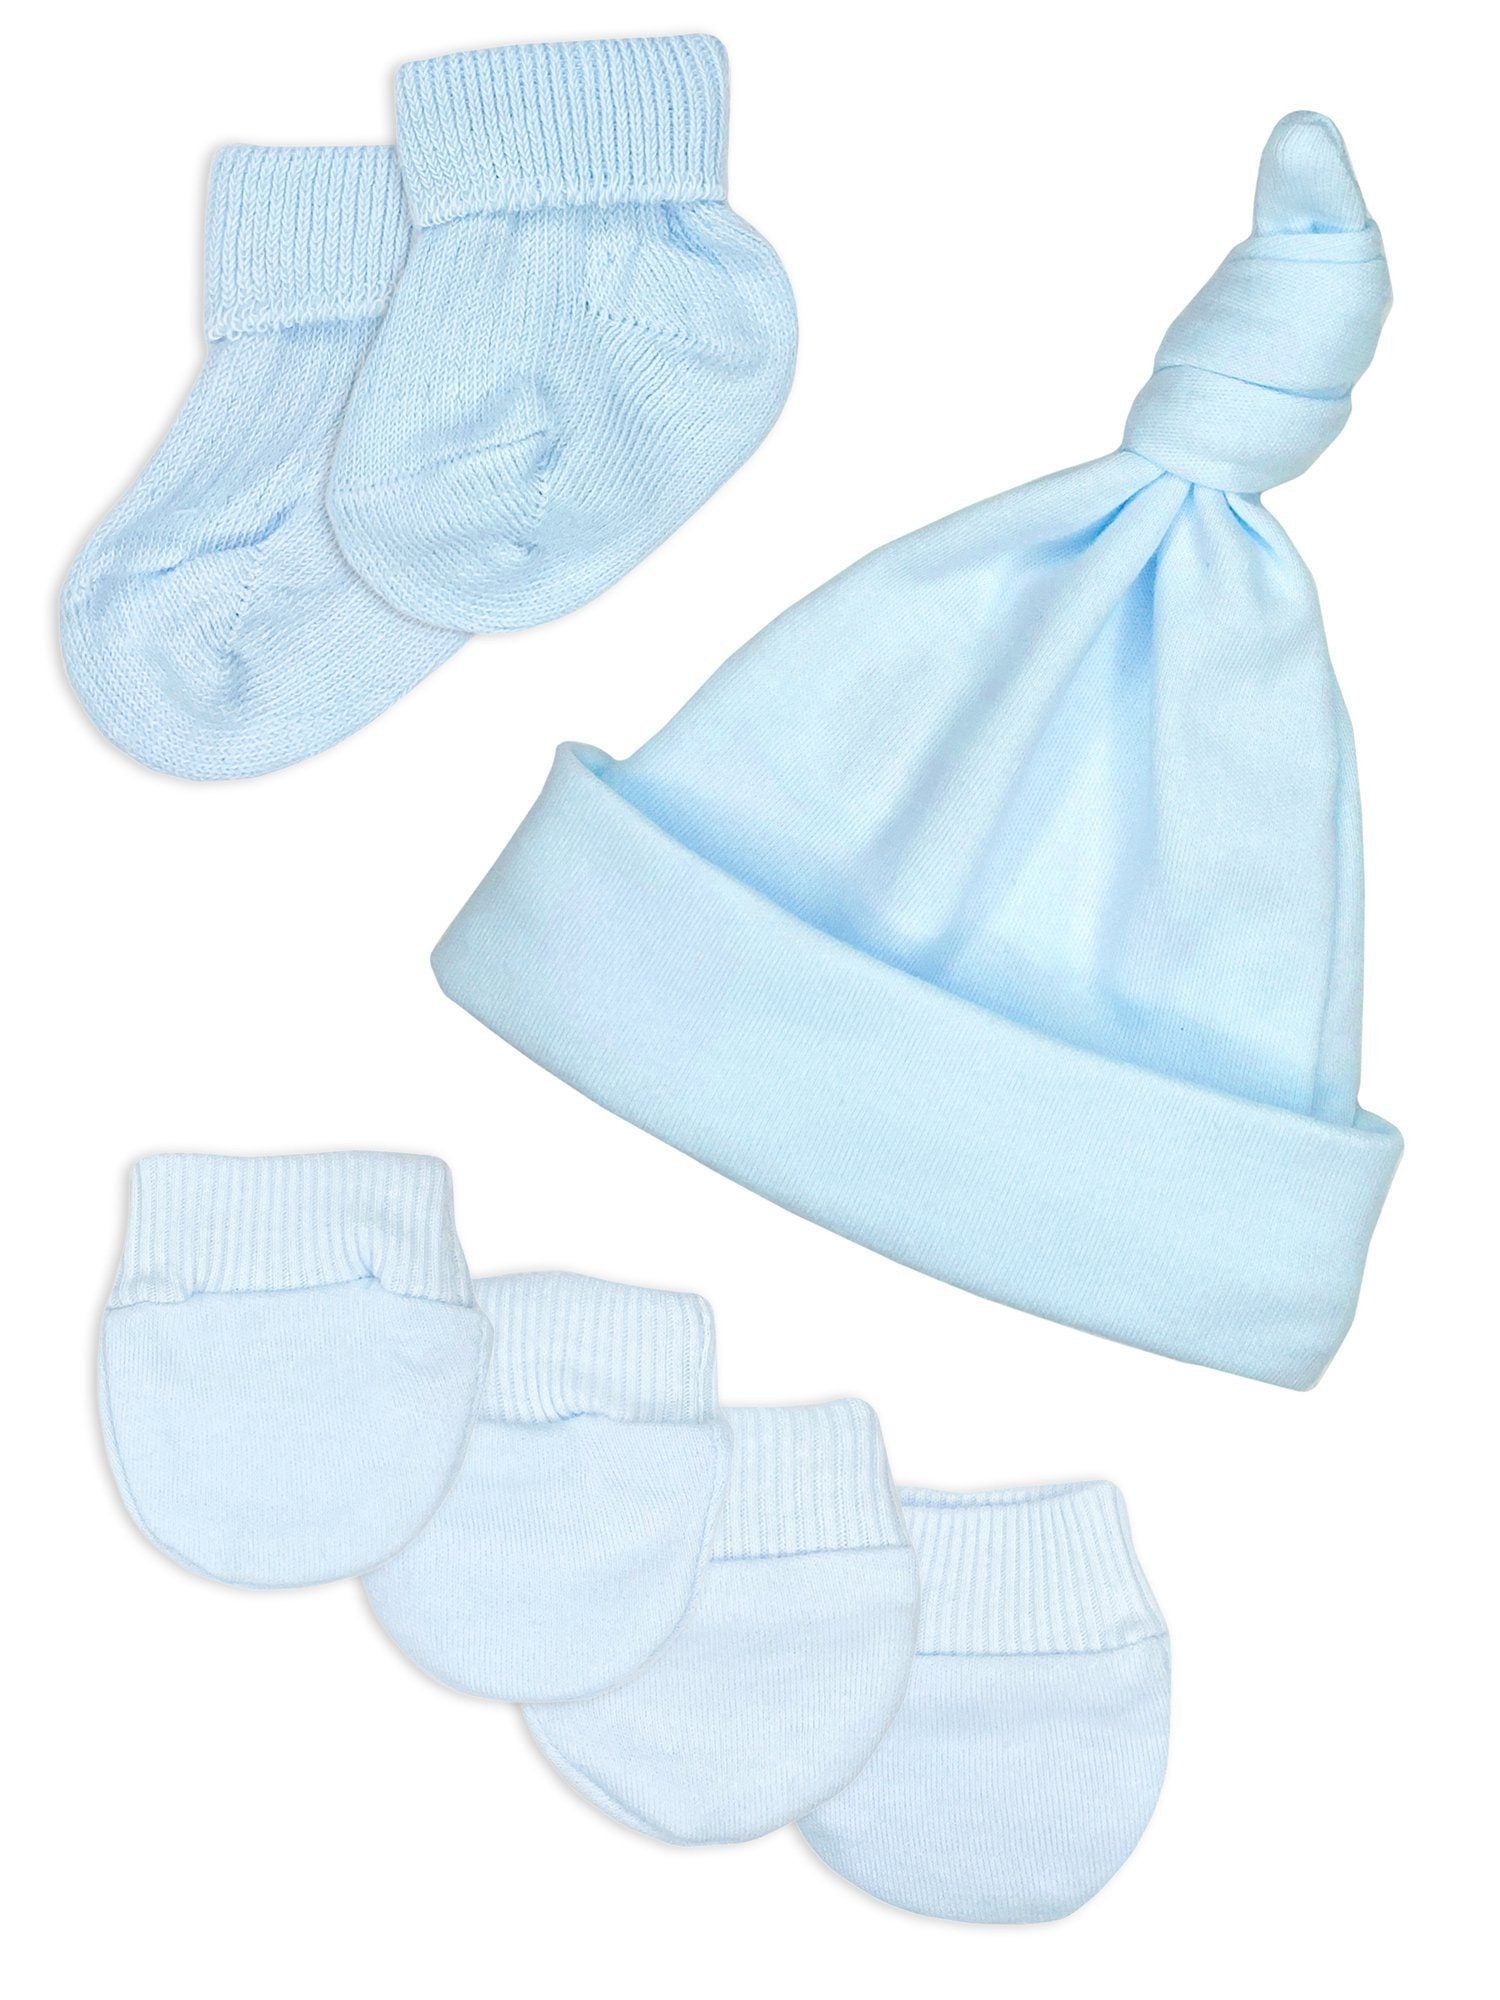 Premature Baby Knotted Hat, Socks and Mitts Set - Blue - Hat, Mitts & Booties Set - Little Mouse Baby Clothing & Gifts